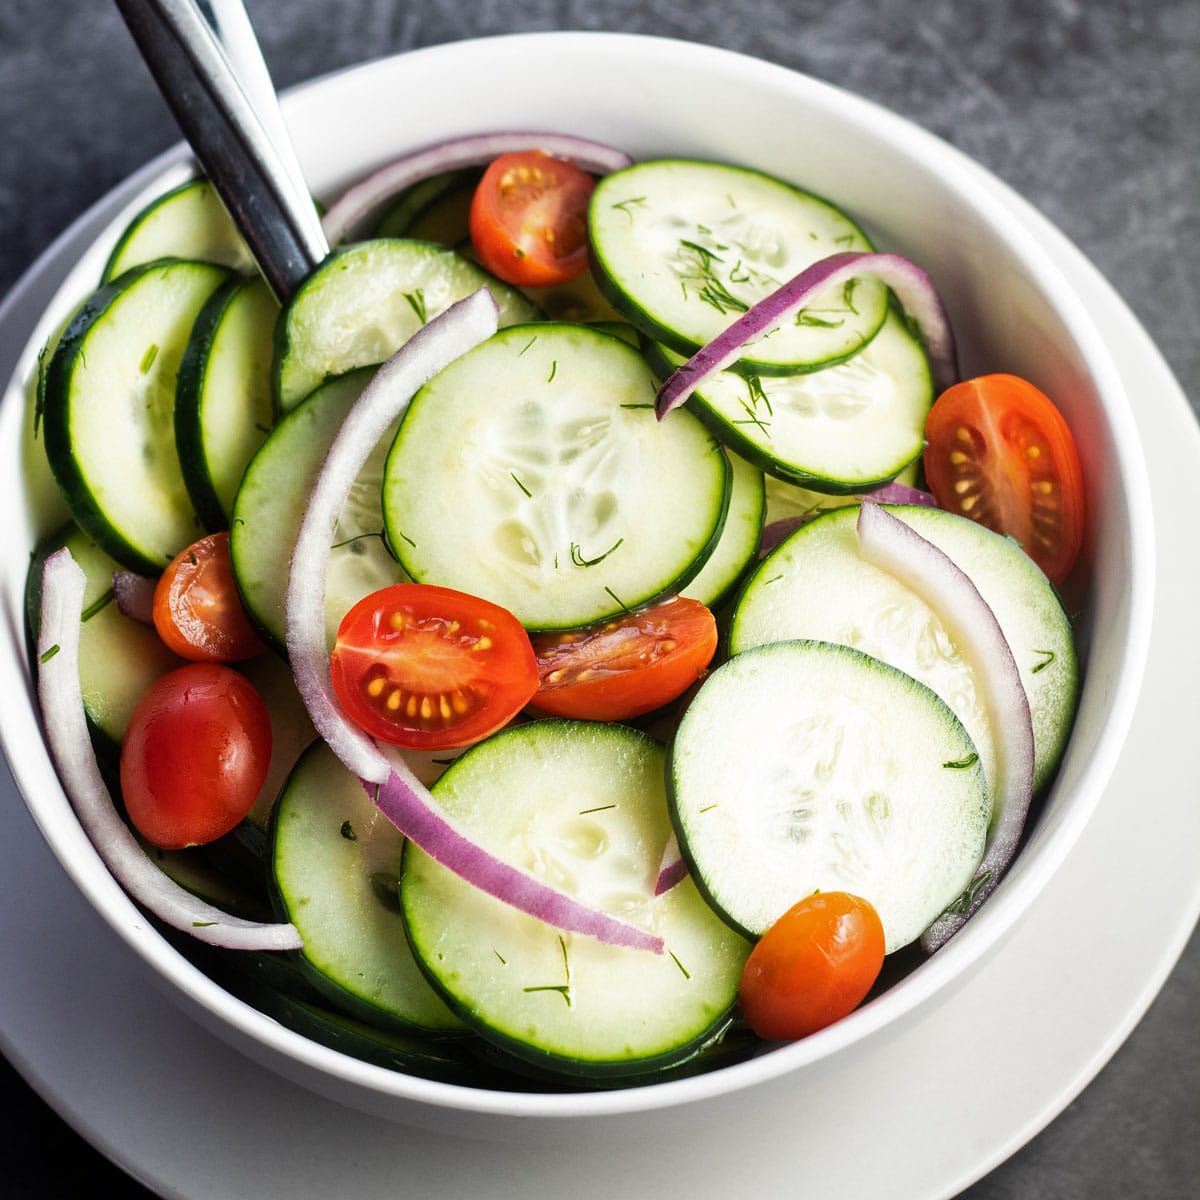 Amazingly tasty cucumber vinegar salad with red onion, cherry tomatoes, and fresh dill.